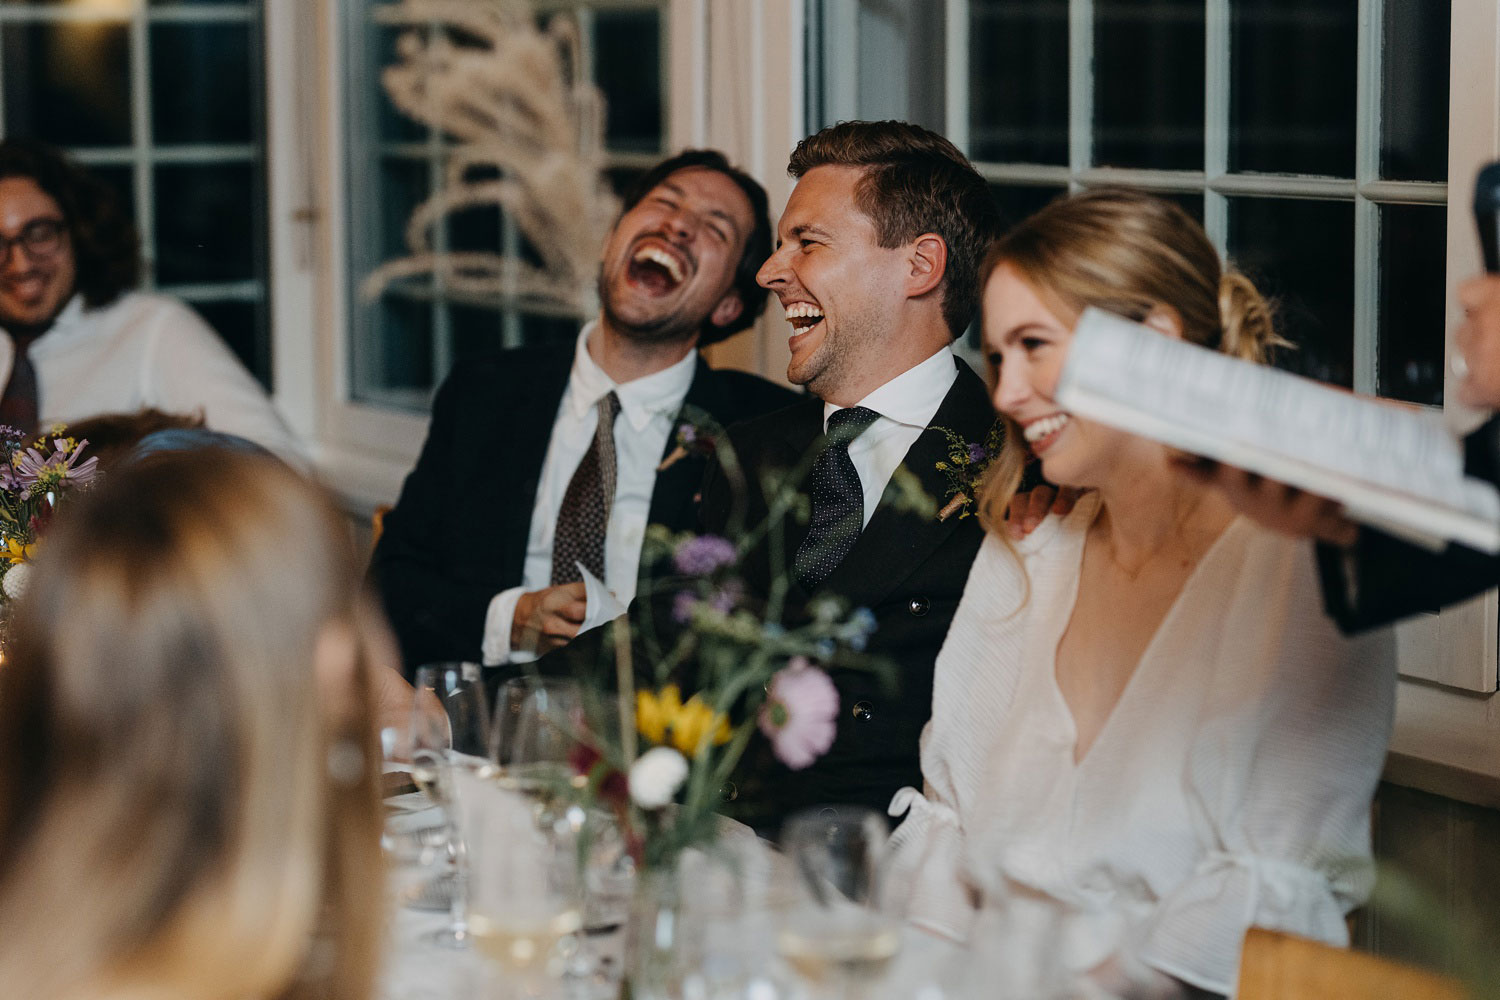 Warm moments as guests share laughter and joy during the heartfelt reception at Helenekilde Badehotel in Tisvildeleje